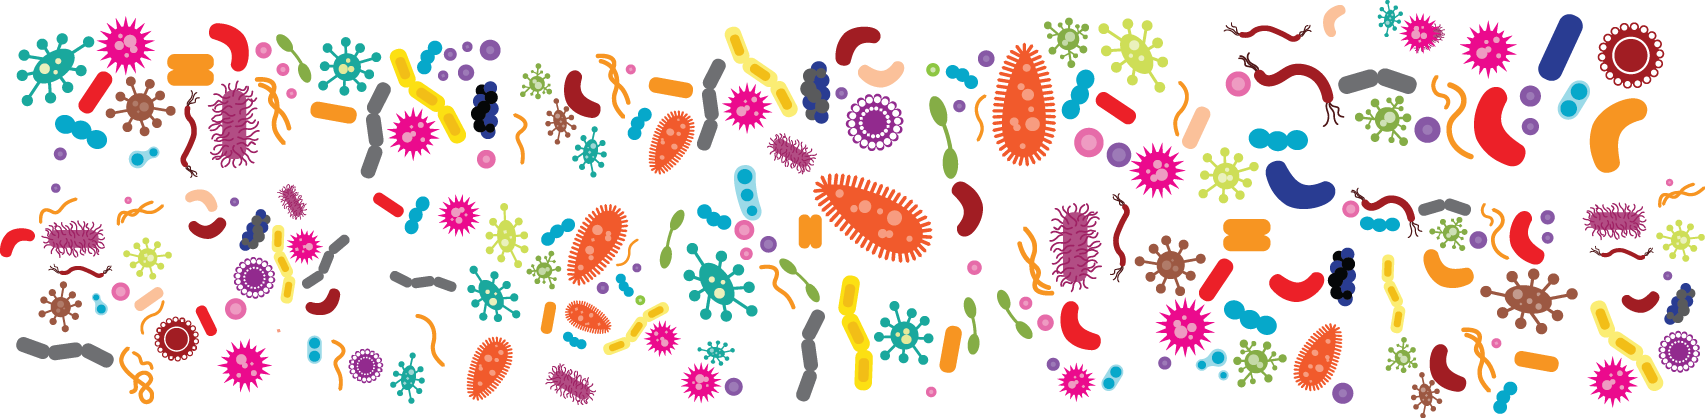 Microbiome banner 2.png